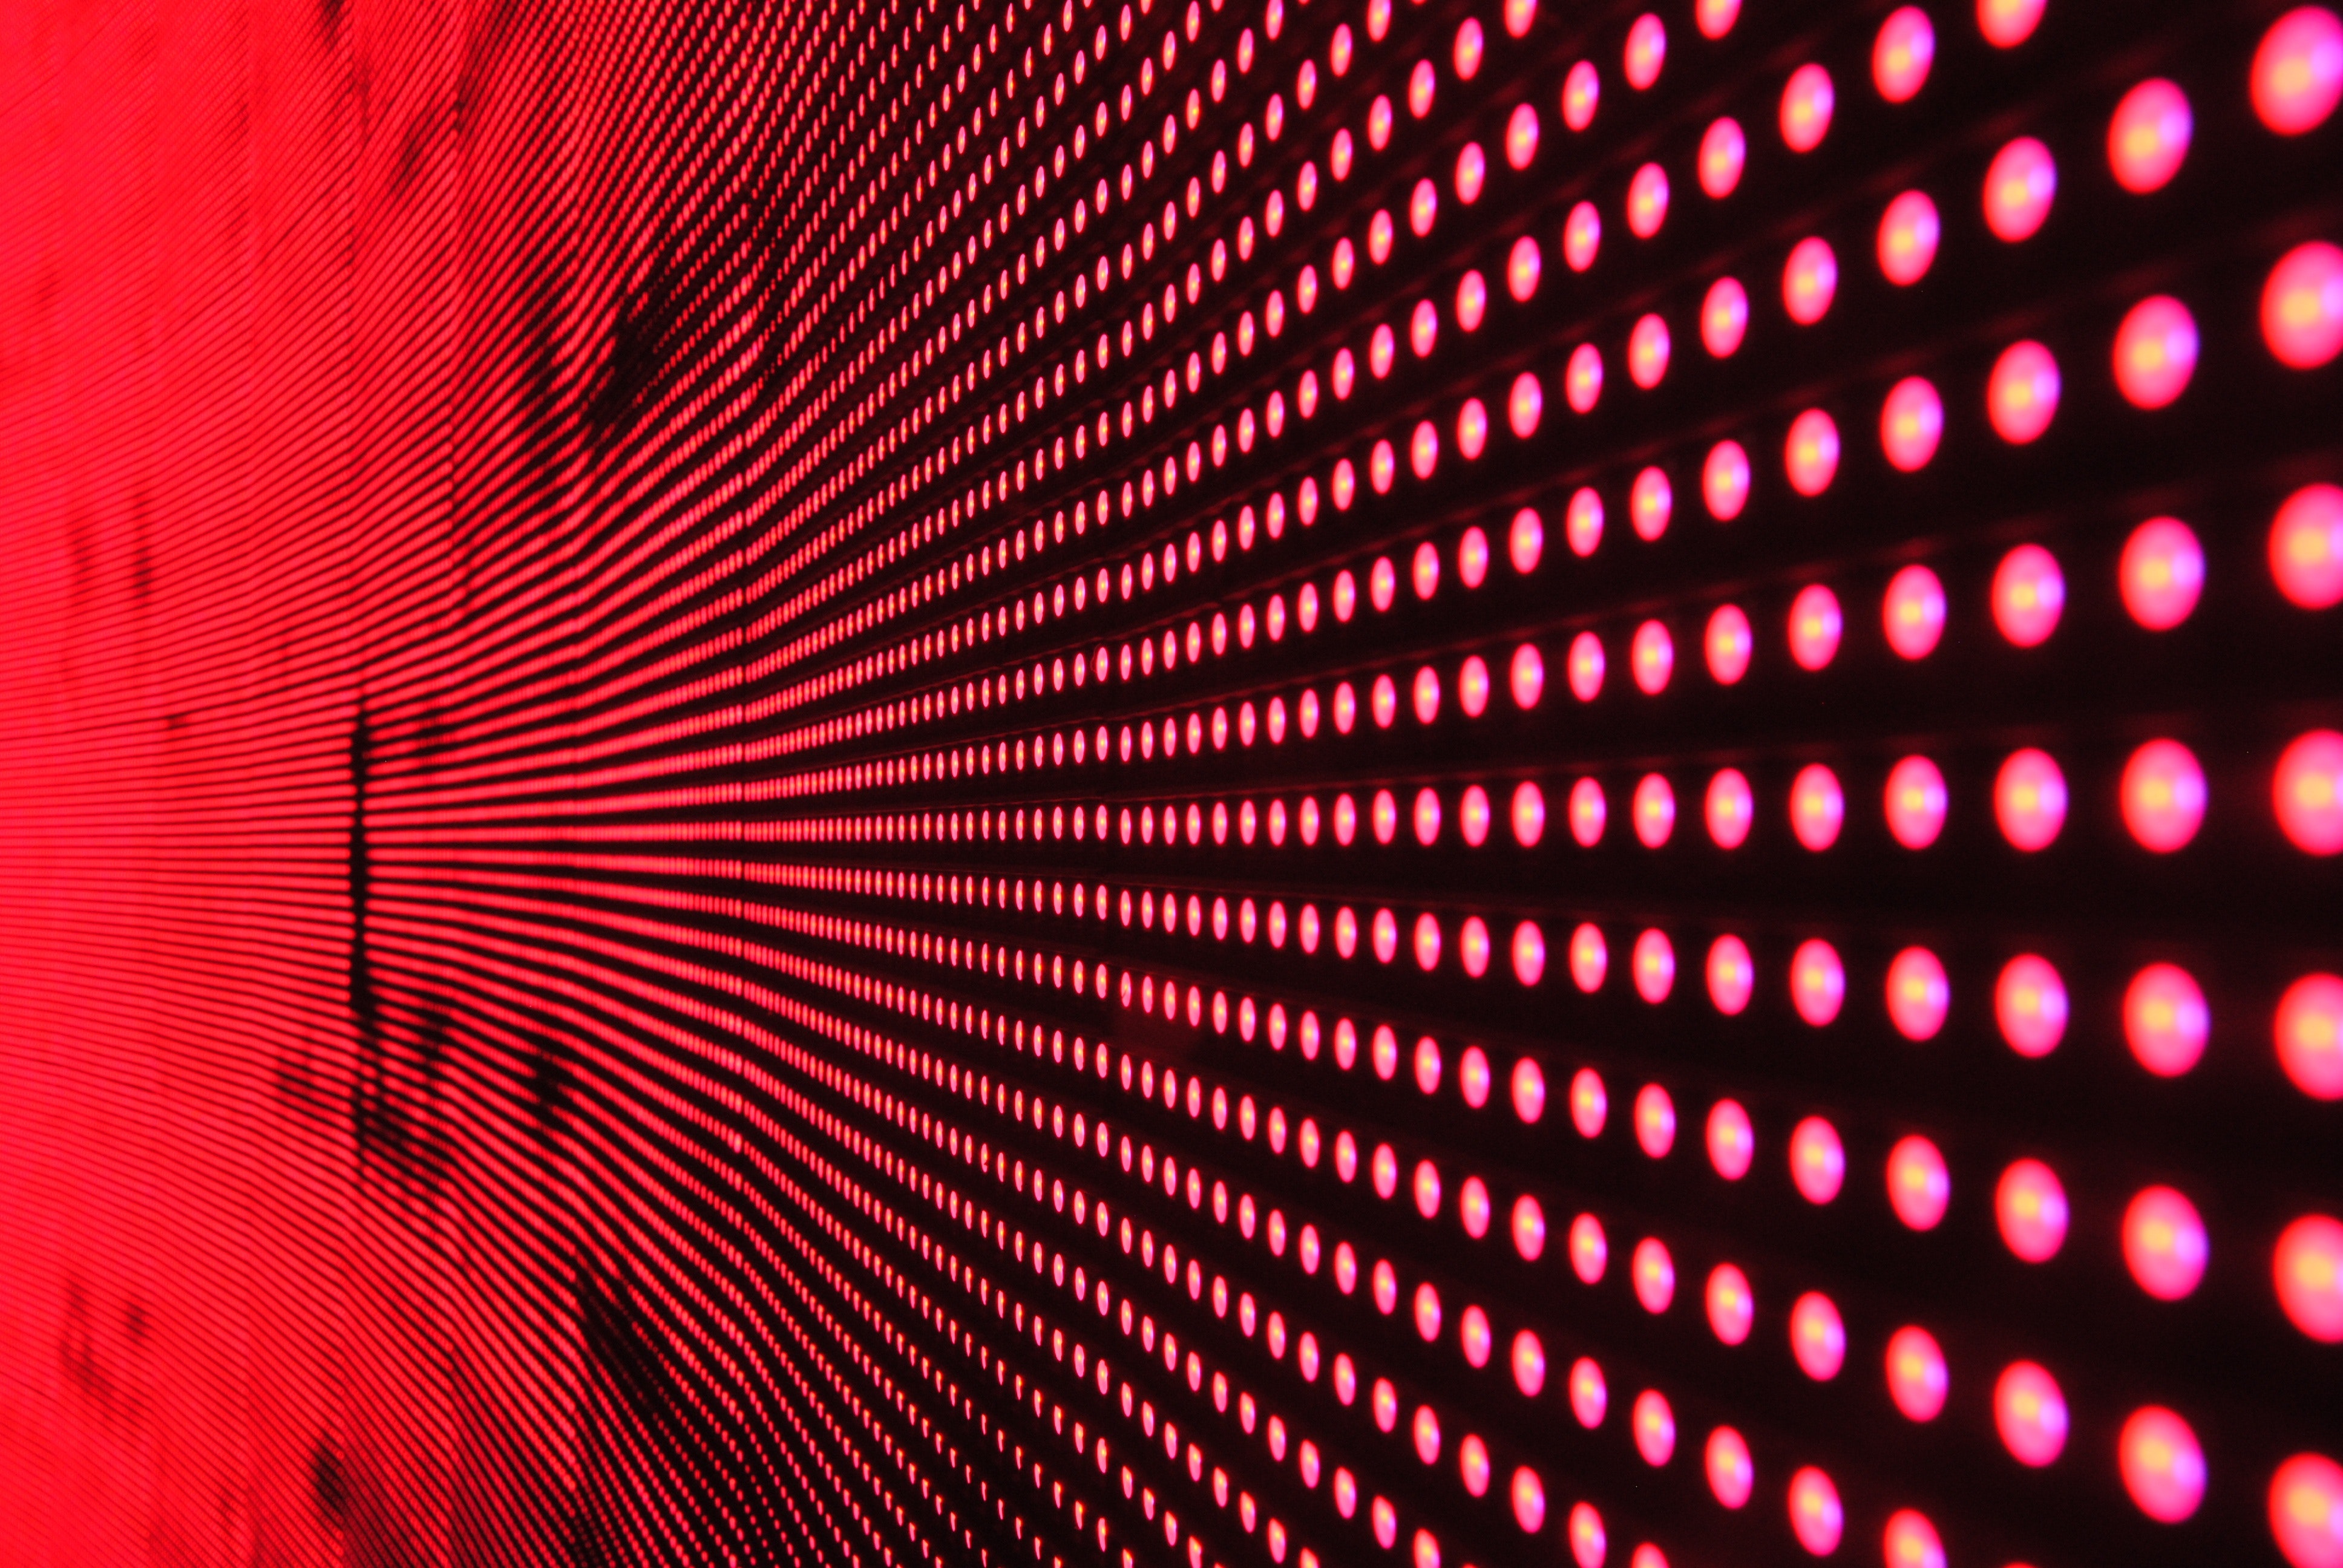 red dots cover a large computer screen